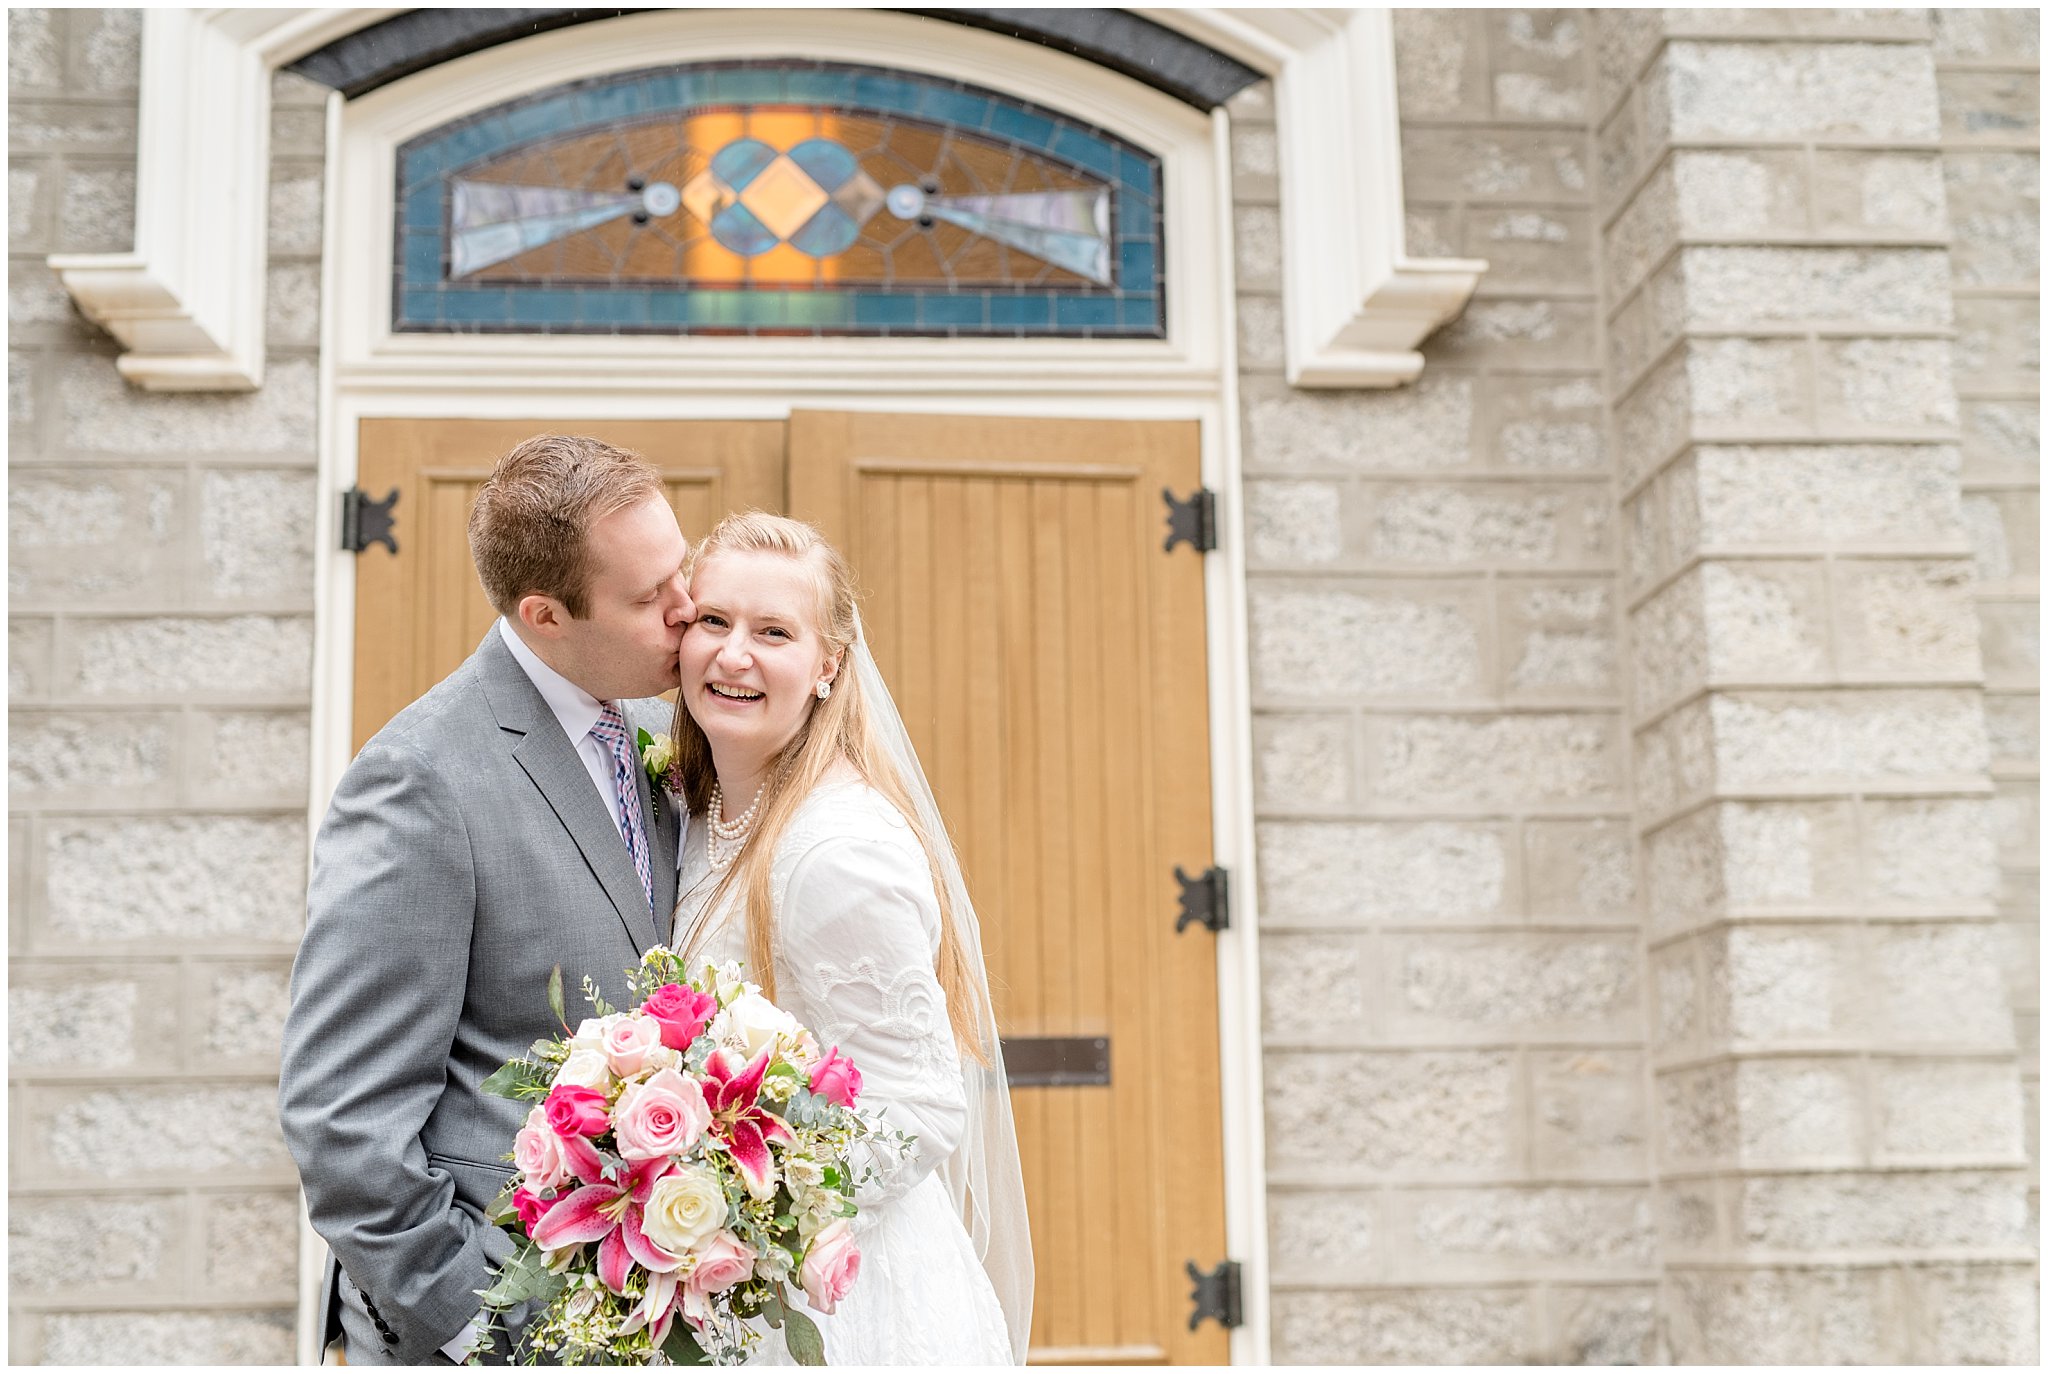 Salt Lake temple bride and groom pictures | Spring Utah LDS wedding | Rose, raspberry, and navy wedding | Assembly Hall and Tabernacle